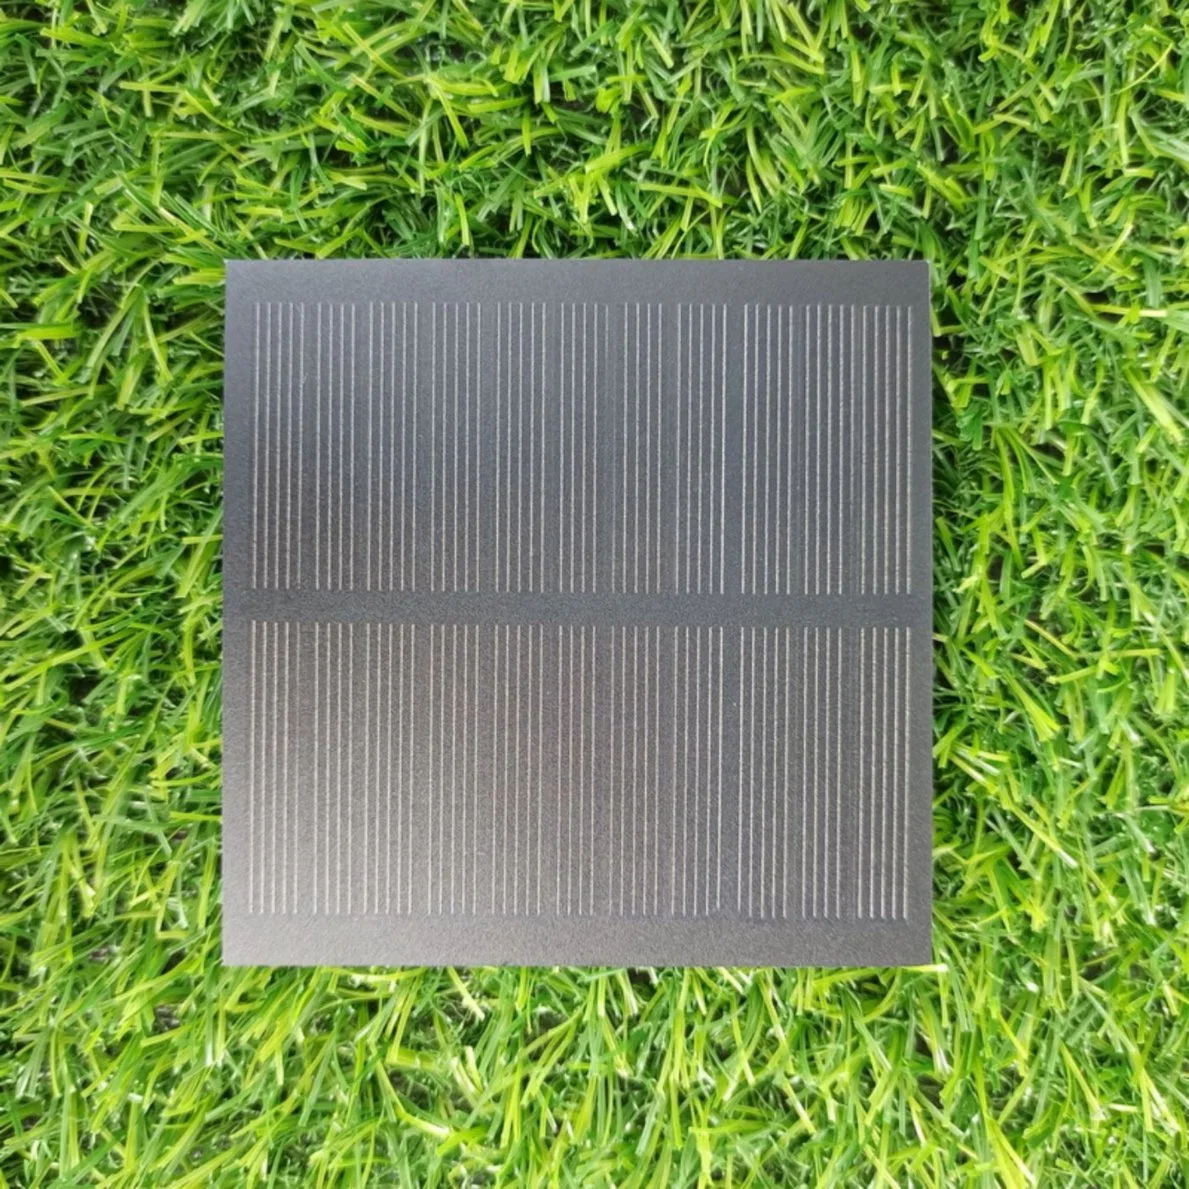 Portable Pet ETFE Glass Mono Silicon PV Module Custom Round Shapes Small Size Mini Frosted Solar Panels 5V 6V 9V 12V 13V 200mA 450mA for 18650 Battery Charger